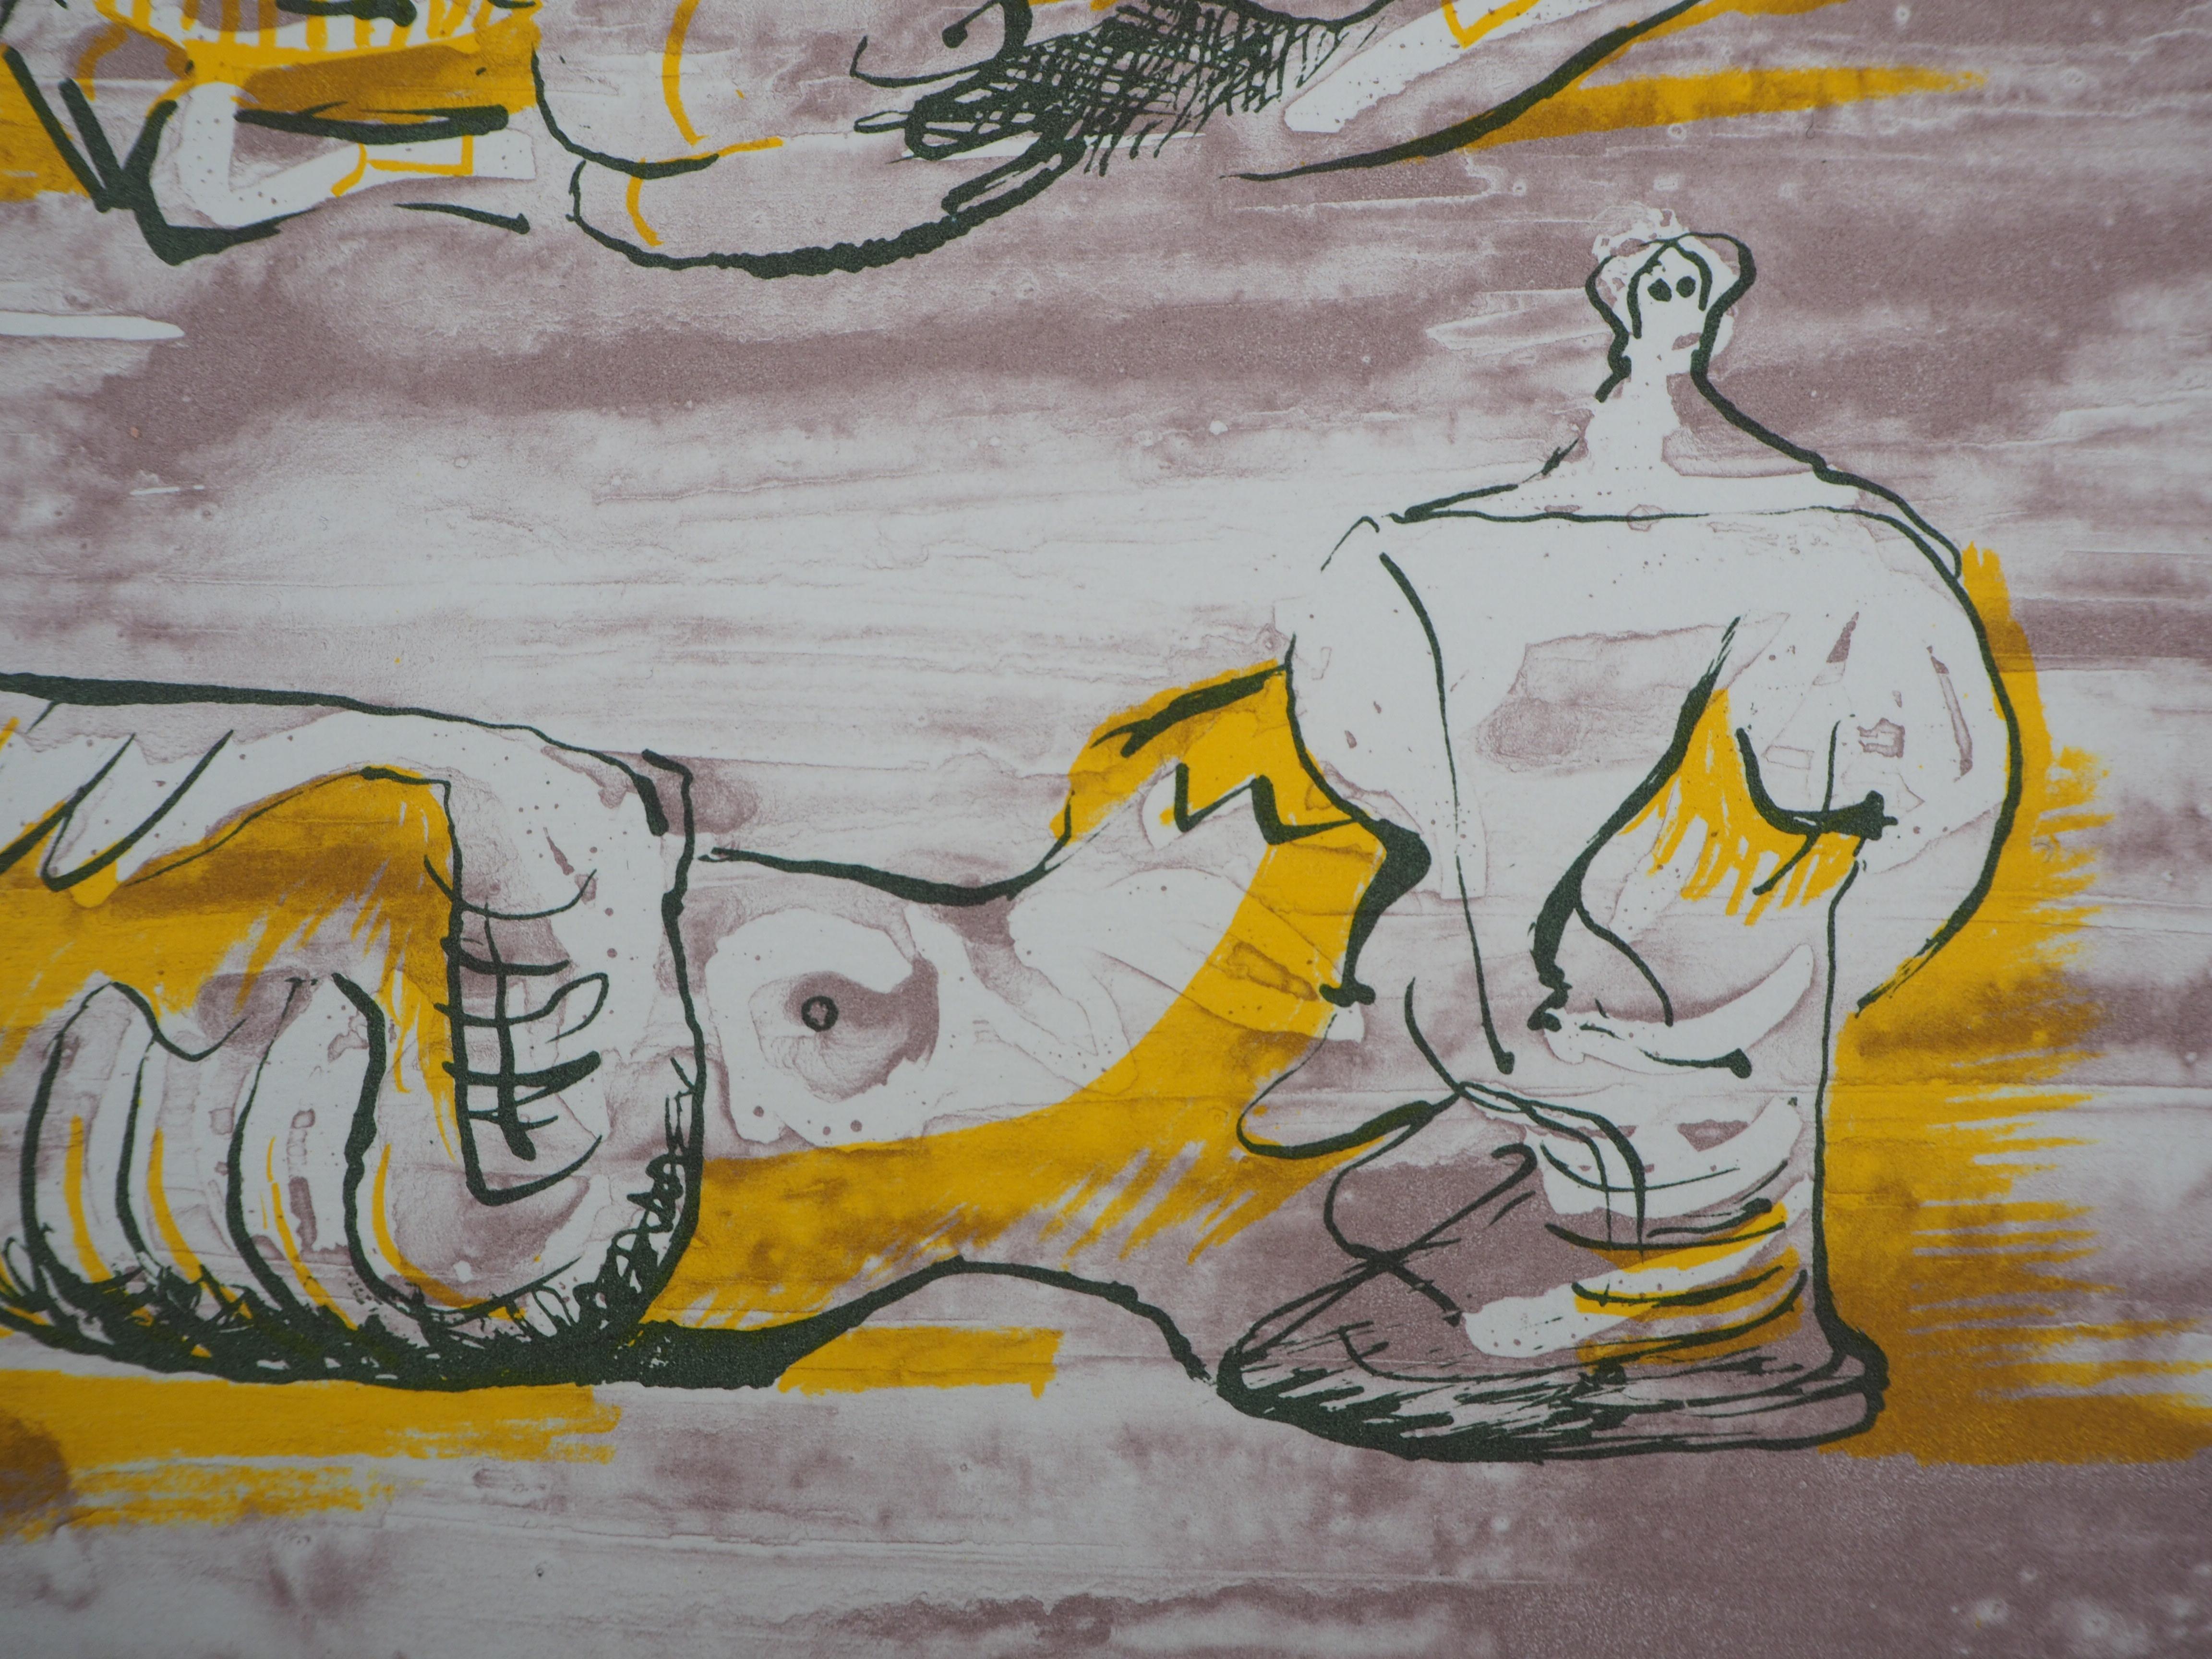 Henry MOORE
Three reclining nudes, 1971

Original lithograph (Printed in Desjobert Workshop).
On wove paper 31 x 24 cm (c. 12 x 10 in)
Edited by San Lazarro, 1971

REFERENCES : Henry Moore Catalogue of Graphic Work, (ed. Cramer, Genève, 1973)